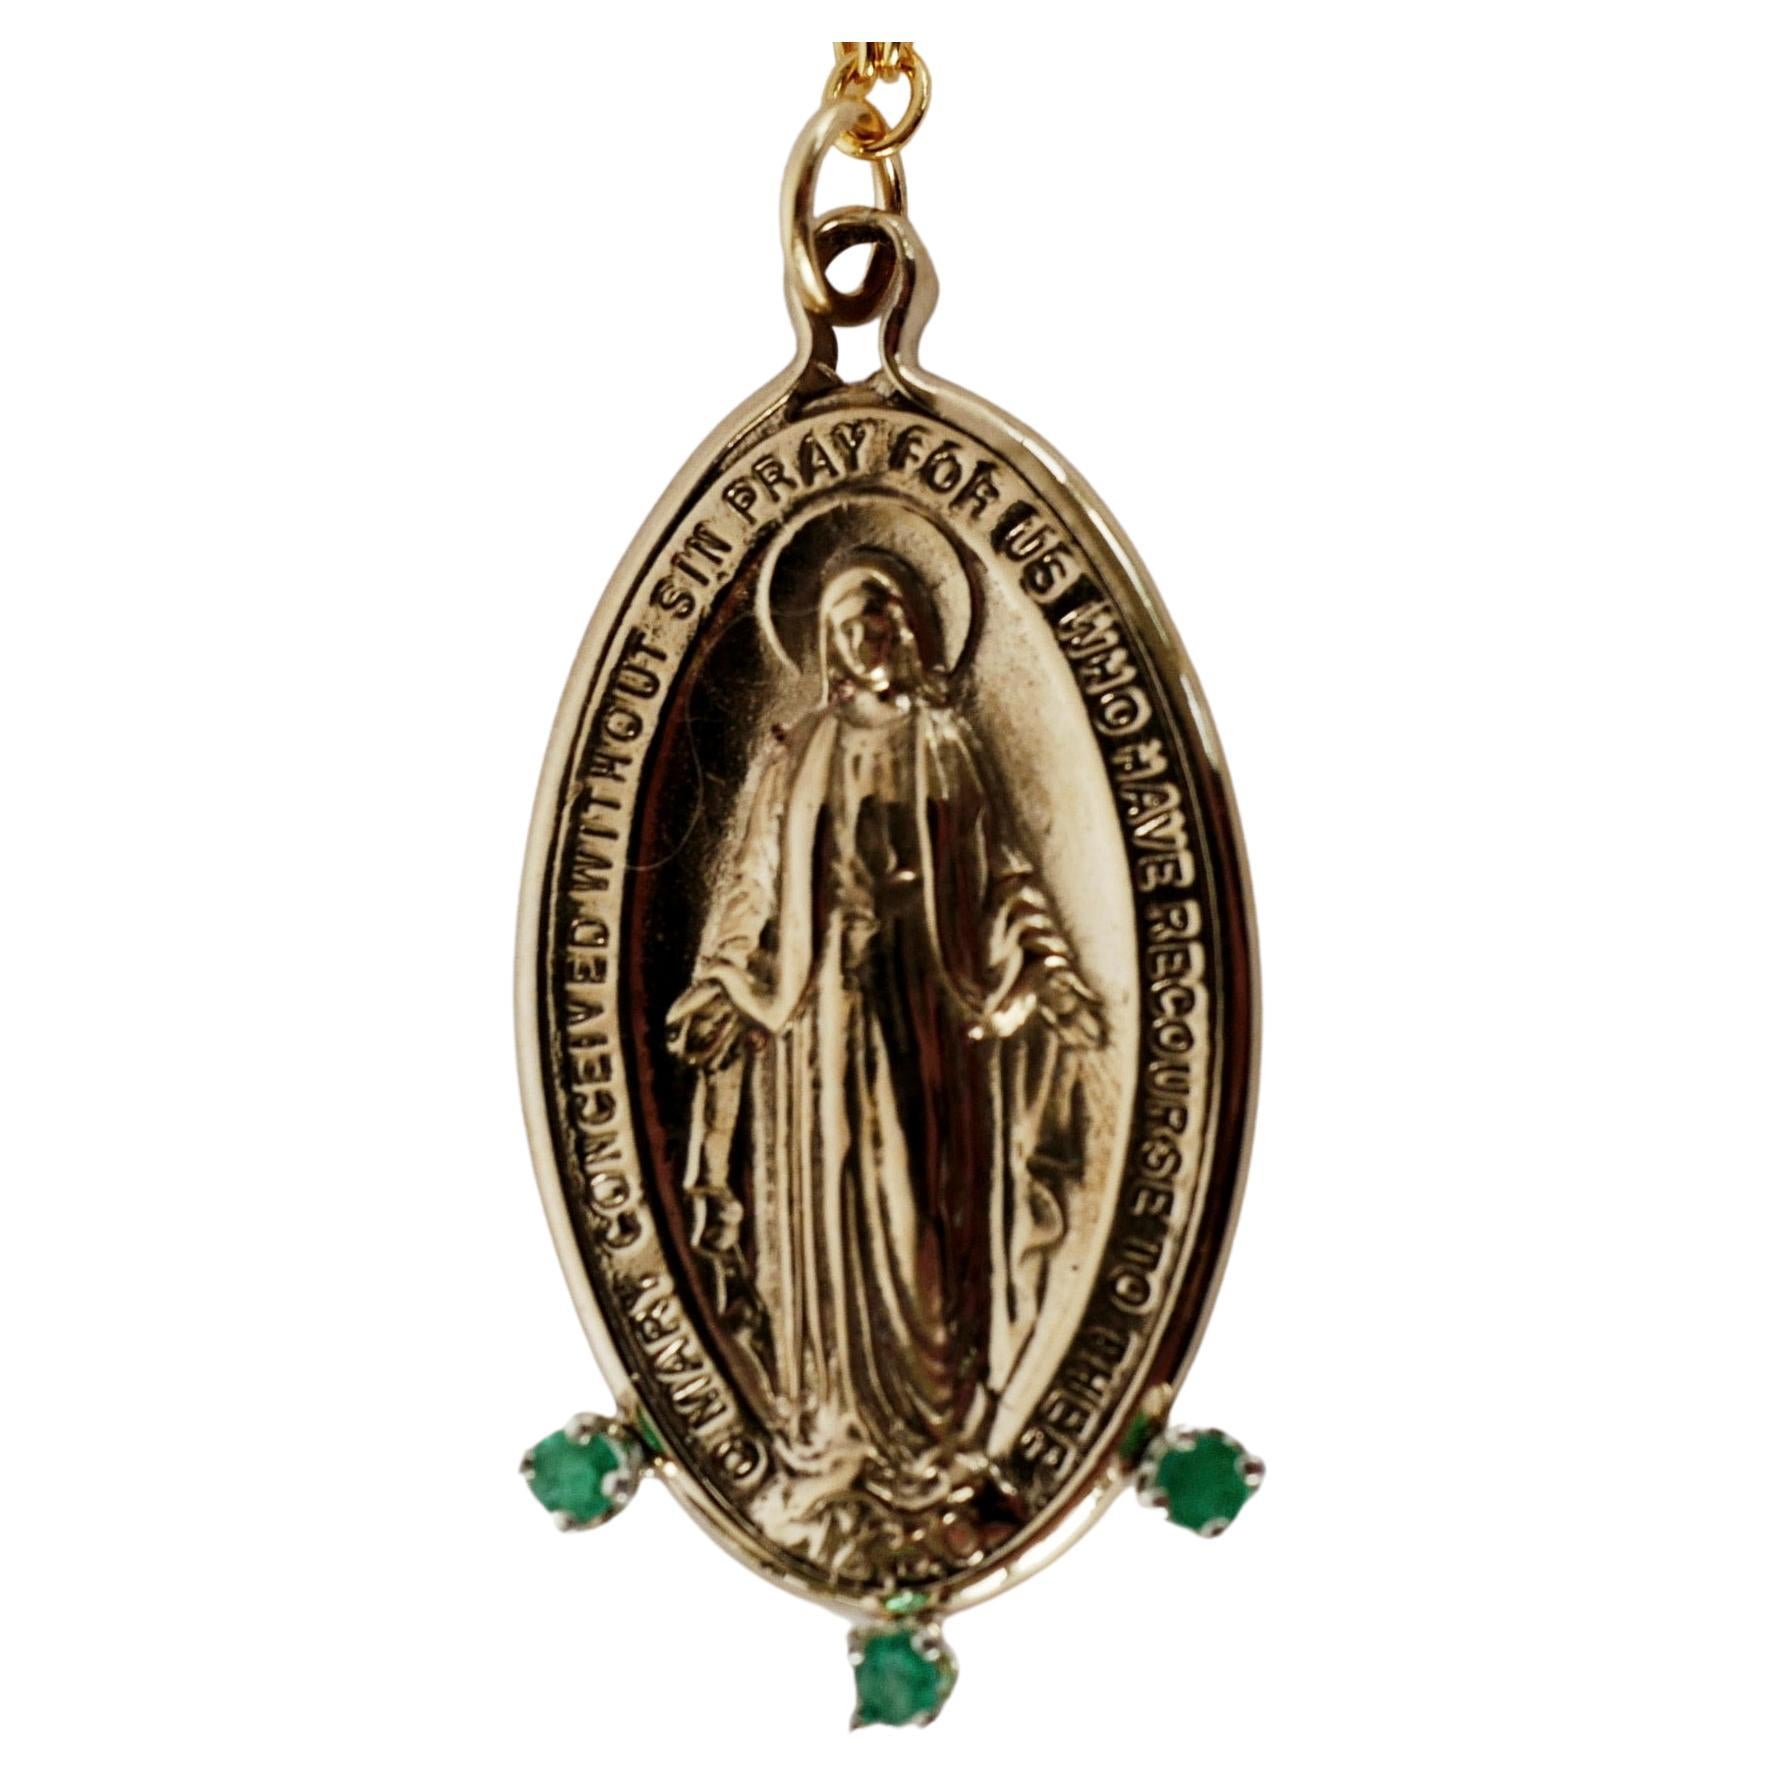 virgin mary necklace meaning